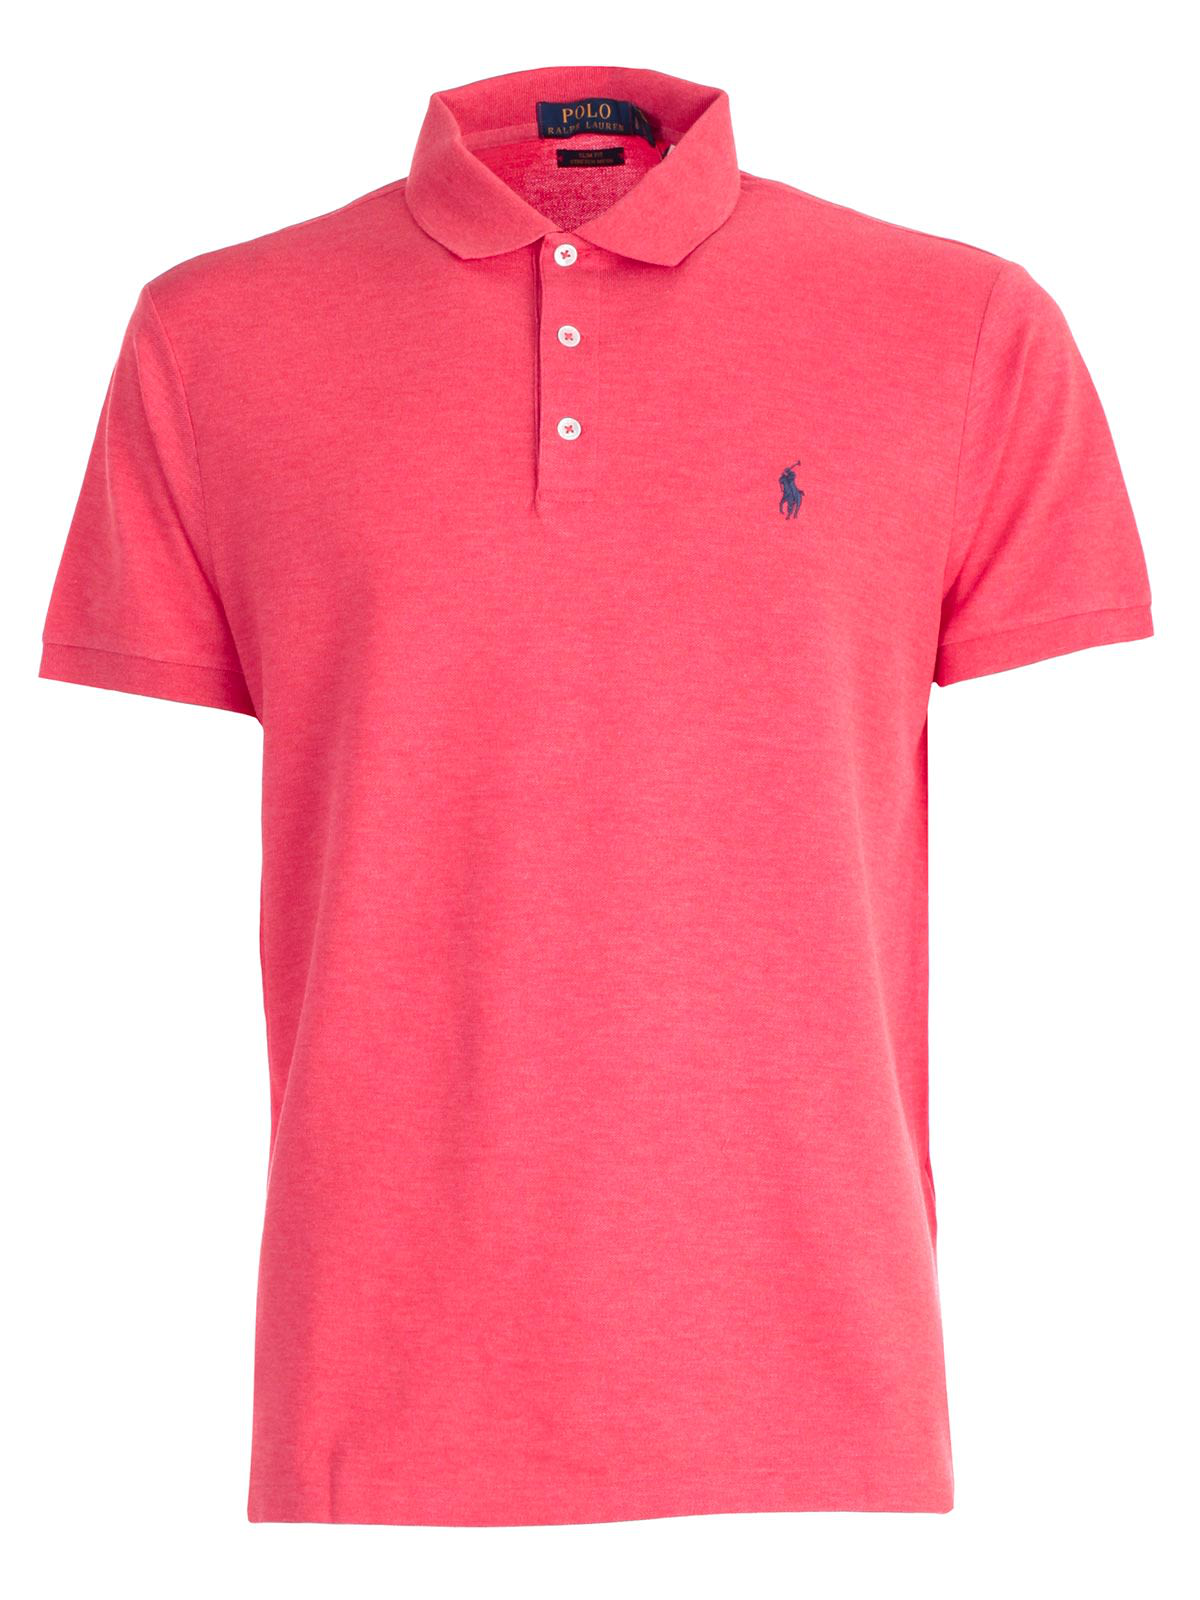 Polo Ralph Lauren Embroidered Logo Polo Shirt In Highland Rose Heather ...